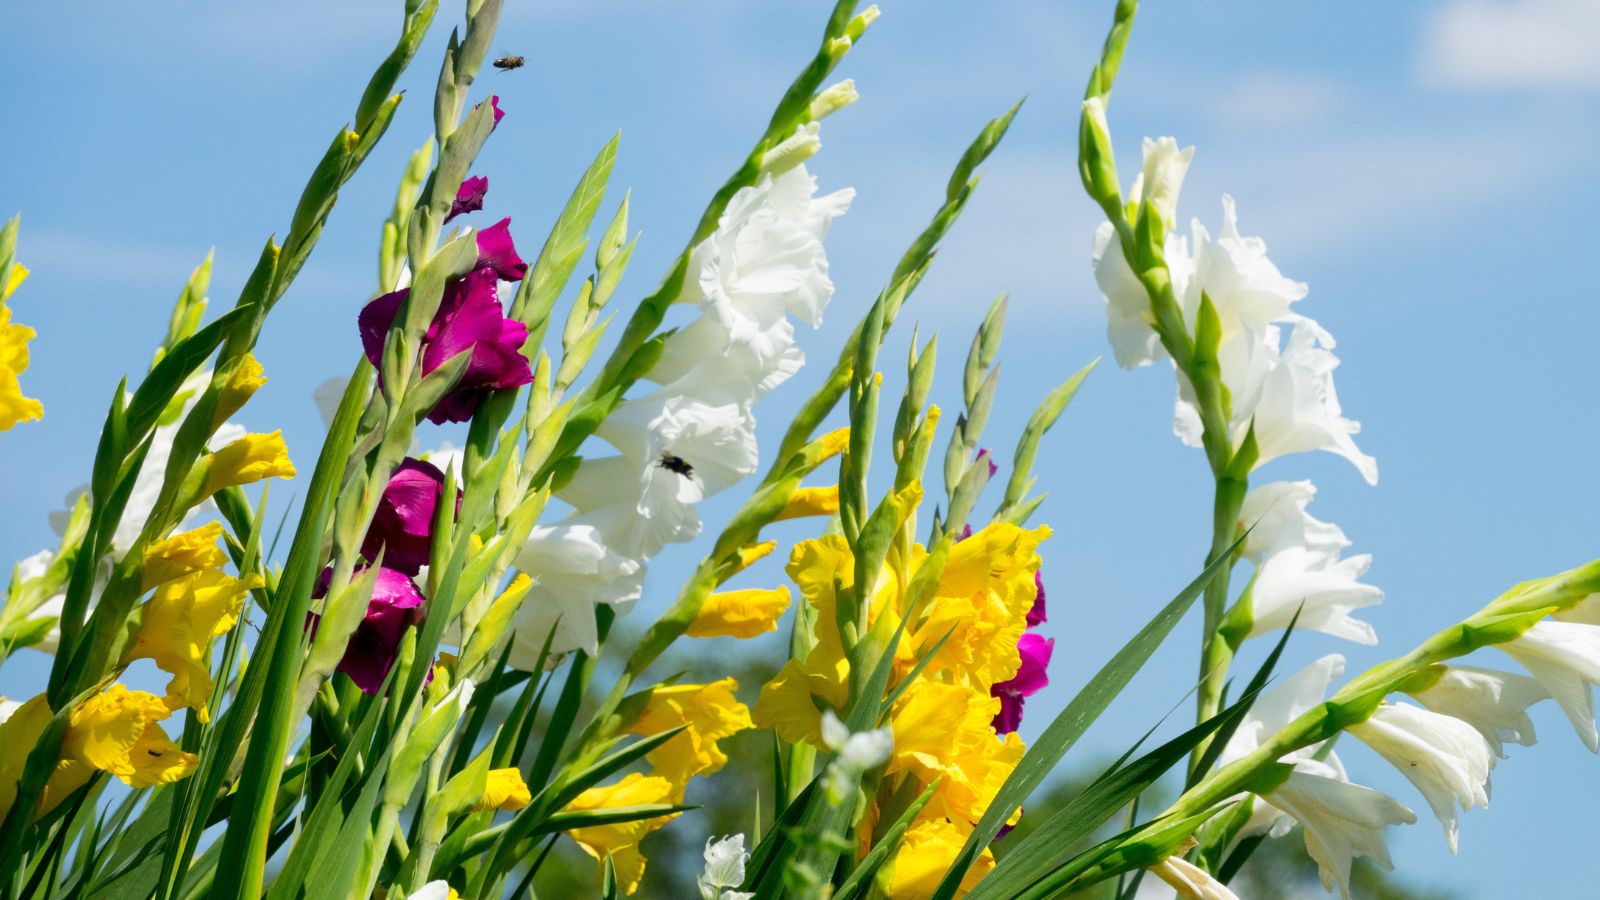 How to plant gladioli bulbs: for brilliant